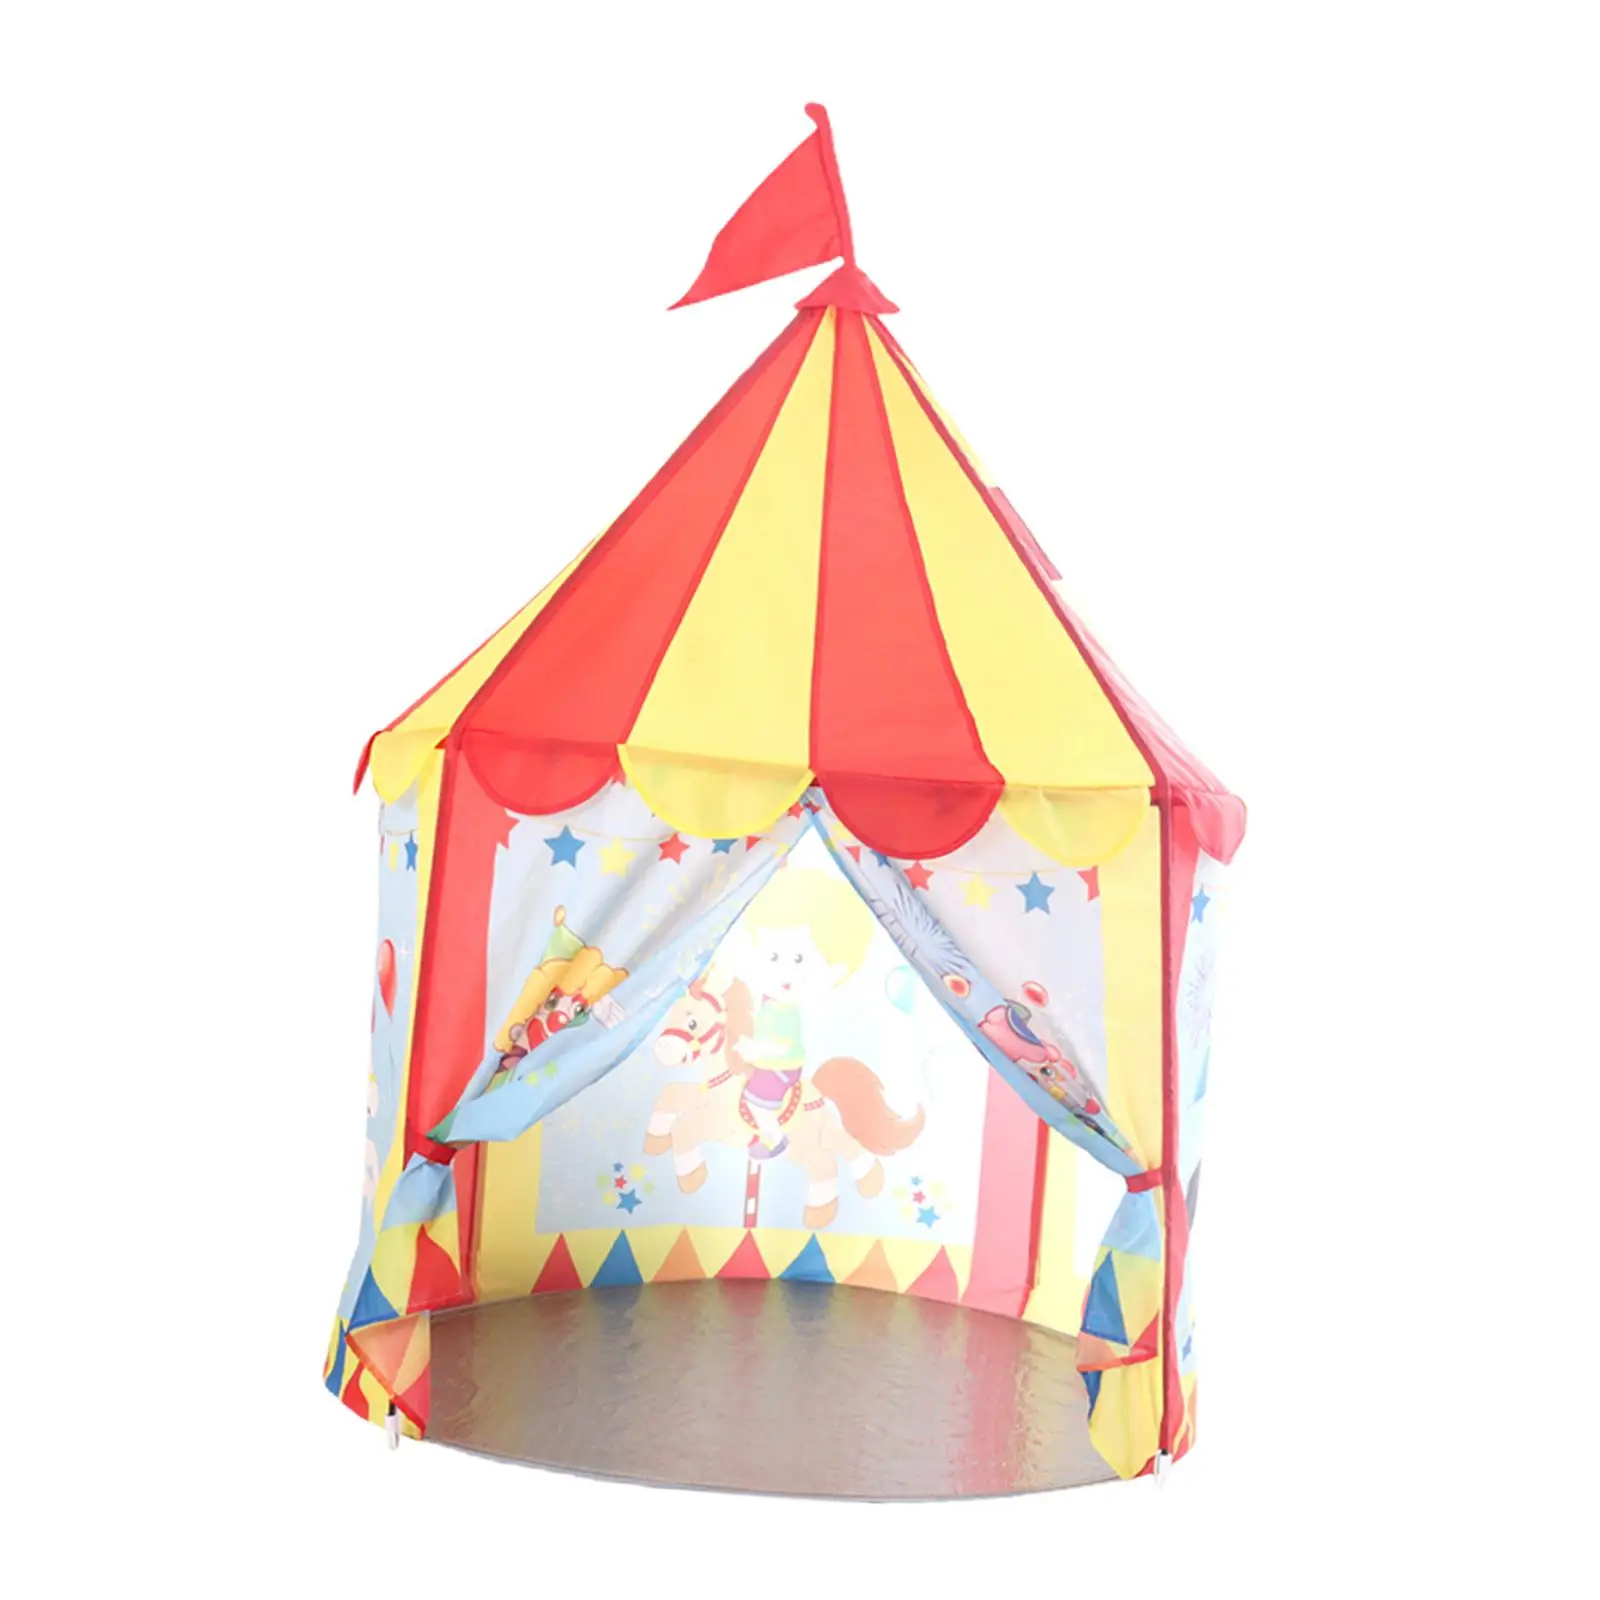 Children Castle Playhous Portable Best Gift for Kids Foldable Easy to Assemble Play Tent House for garden Home Yard Baby